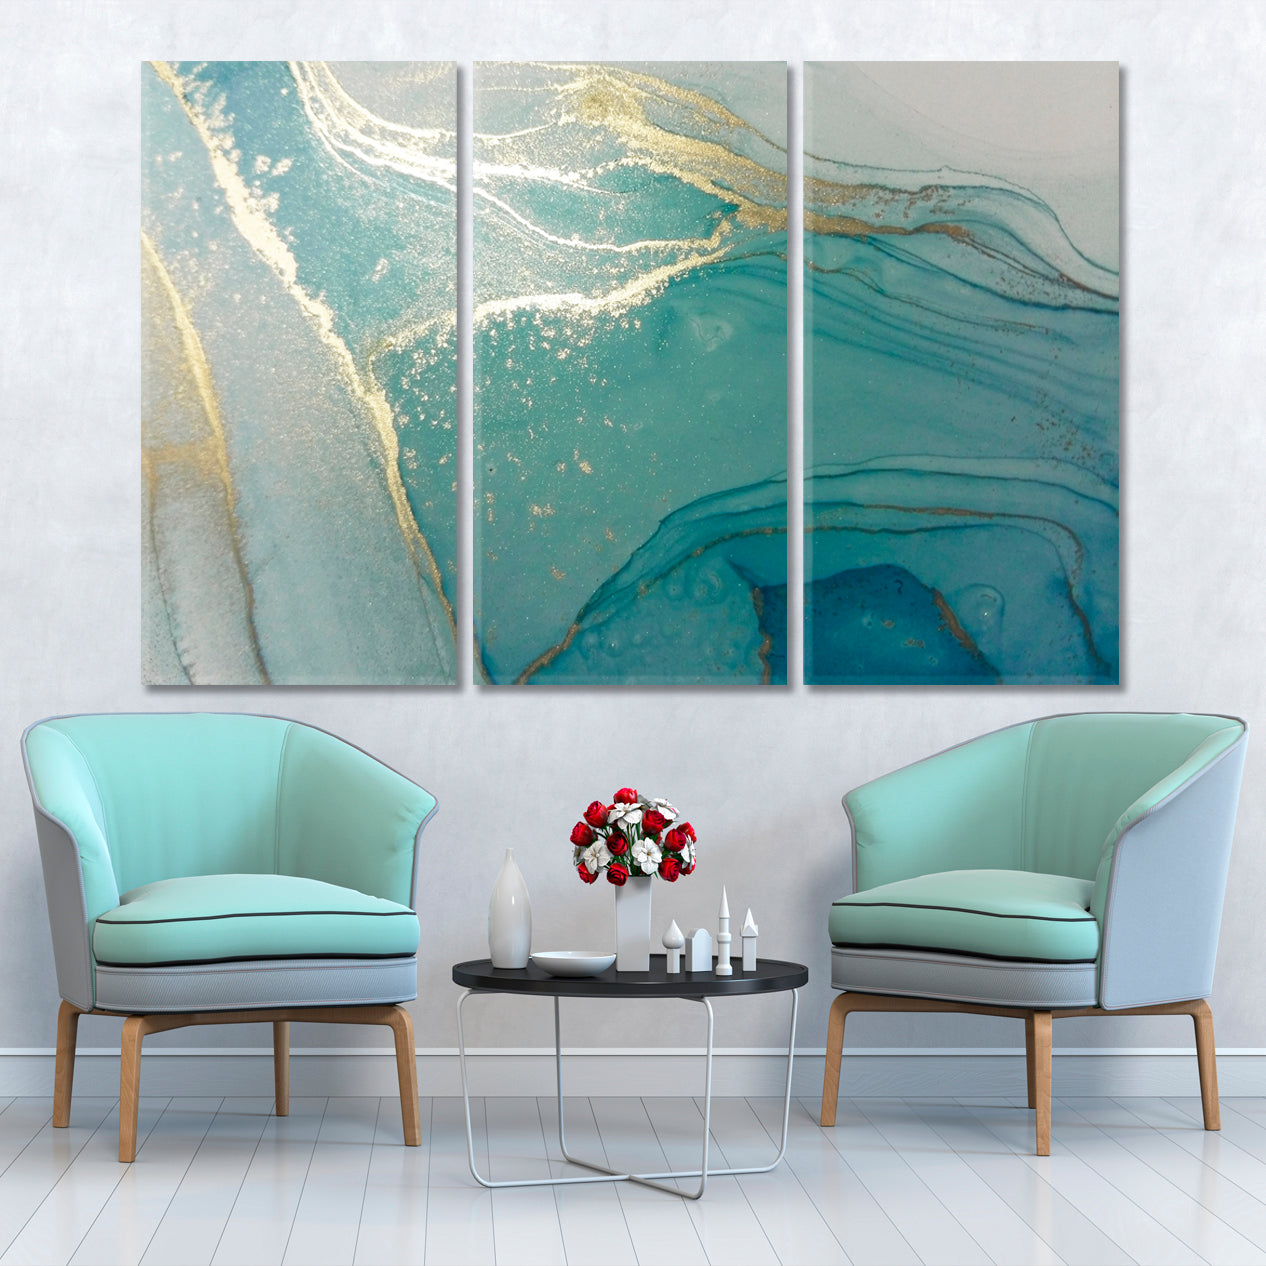 TURQUOISE MINT GOLD Luxury Abstract Fluid Alcohol Ink Fluid Art, Oriental Marbling Canvas Print Artesty 3 panels 36" x 24" 